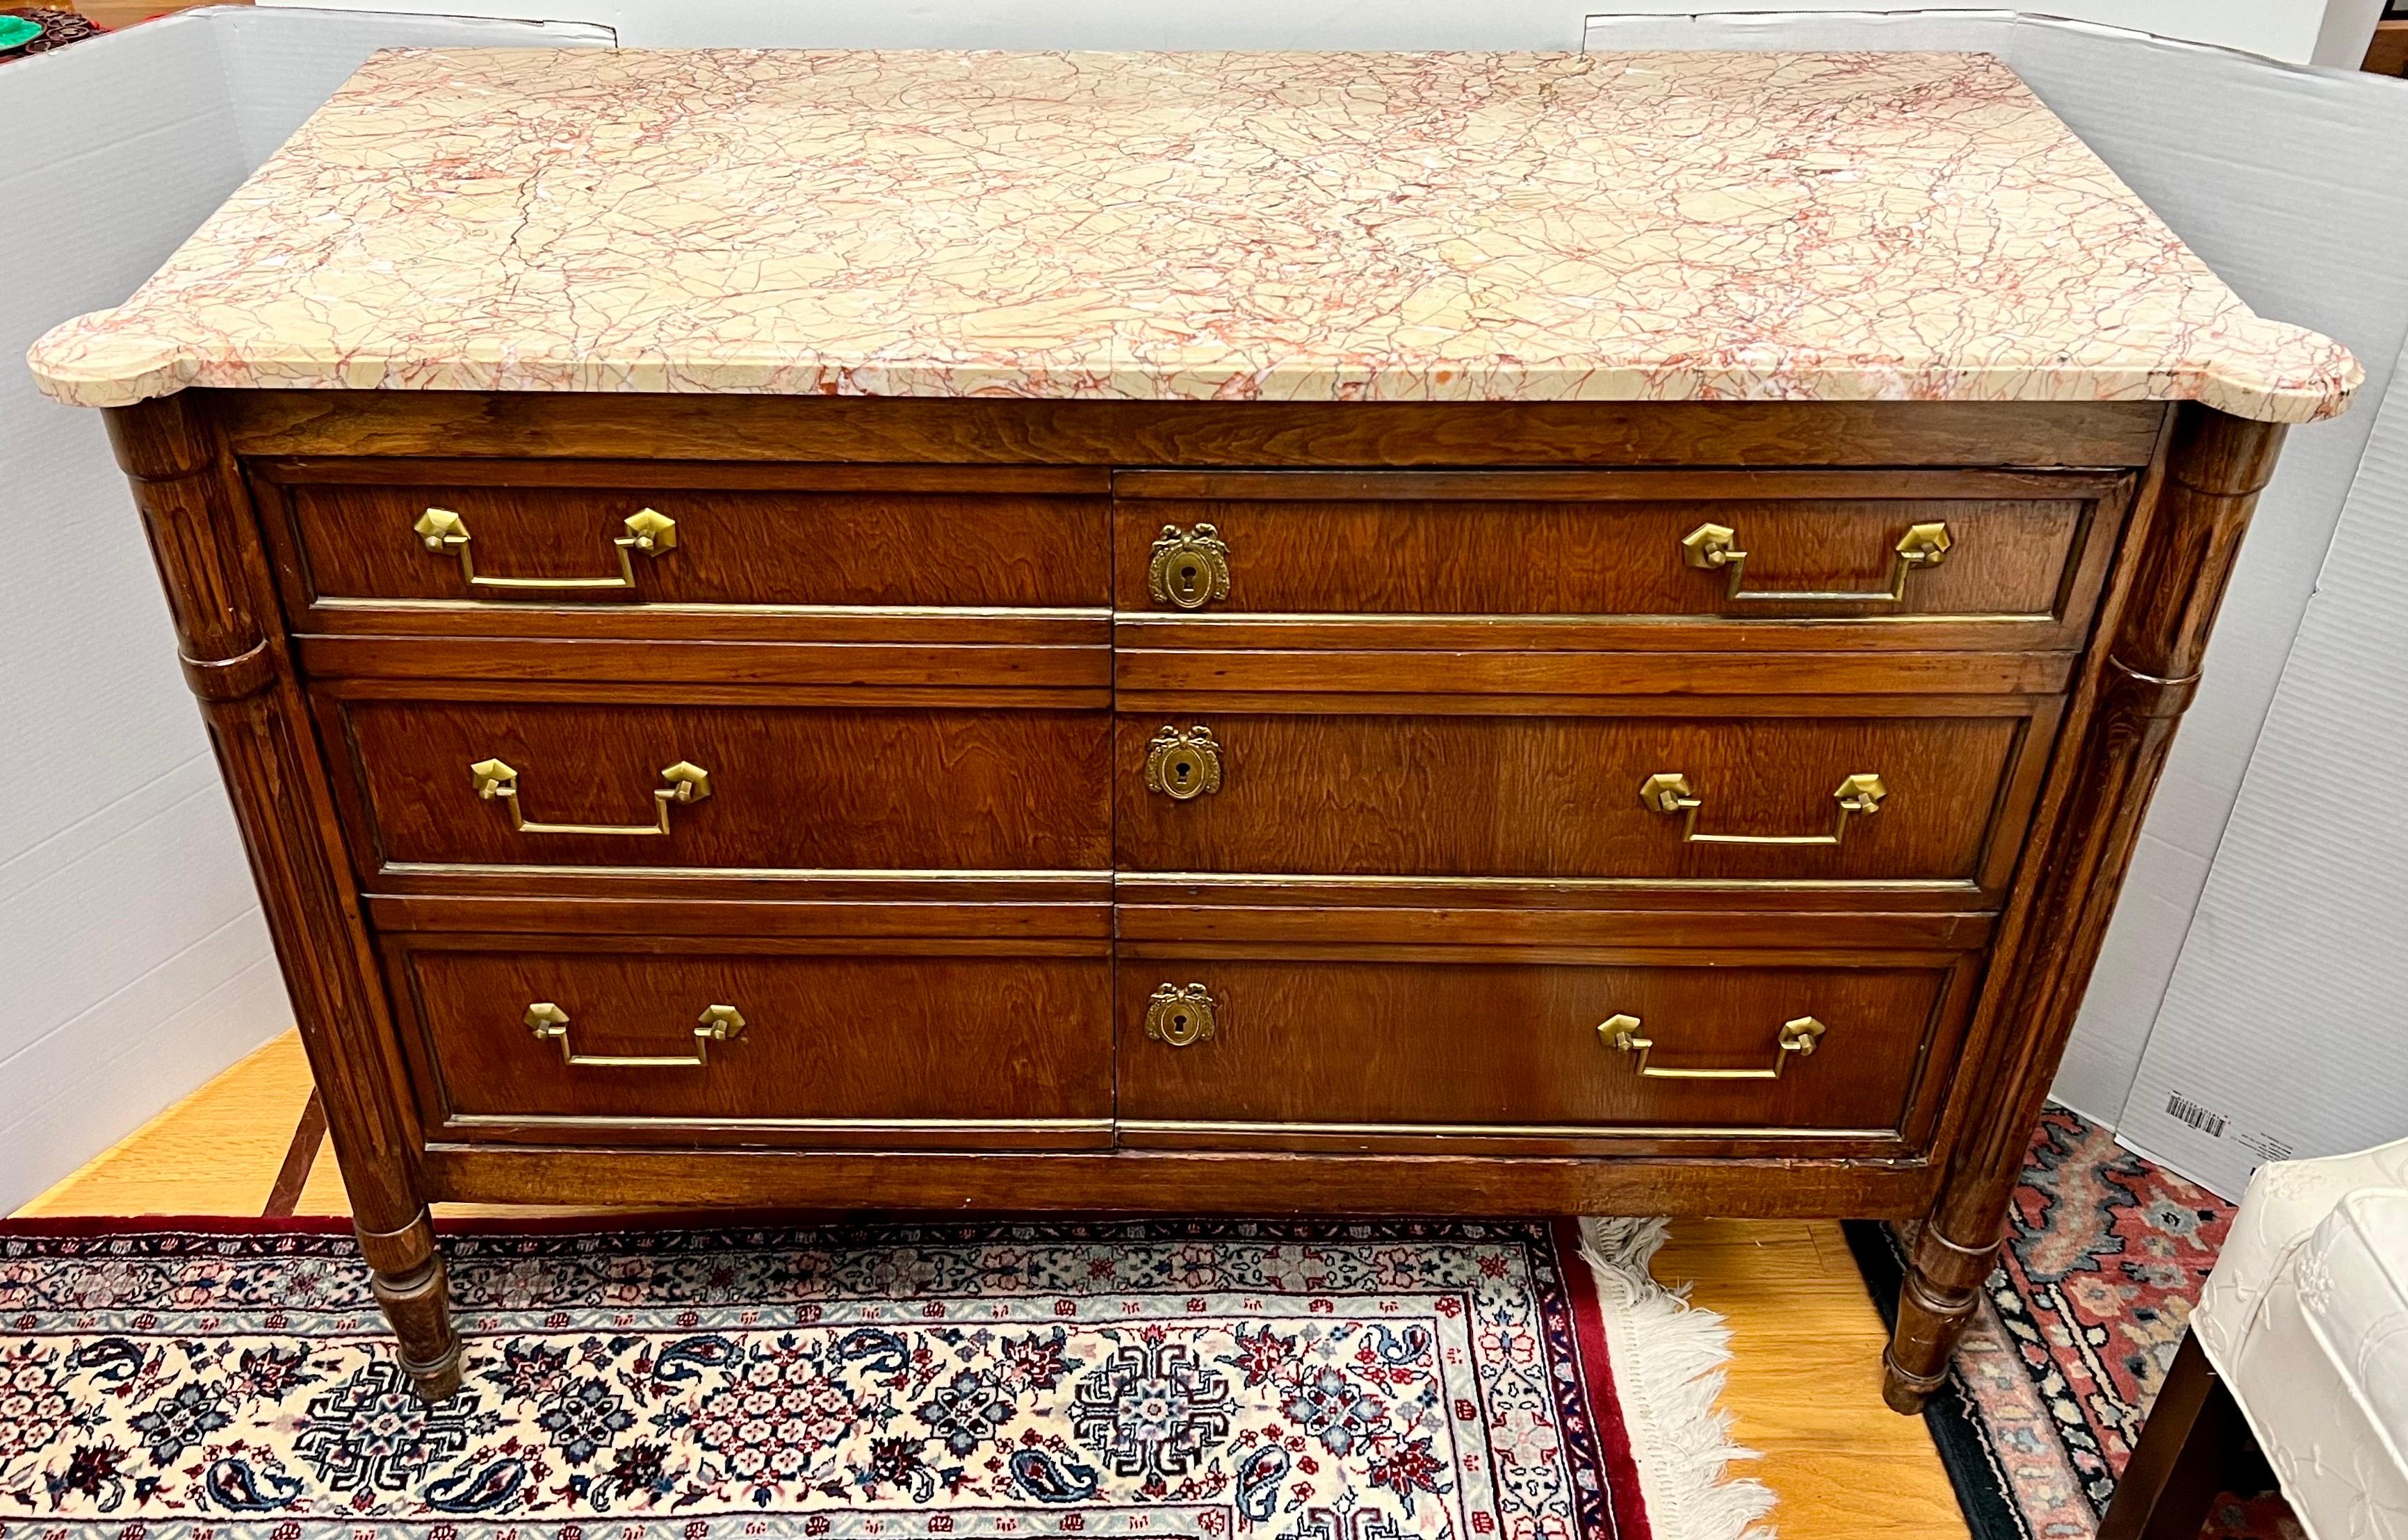 Exquisite French mahogany credenza features a pink marble top with beautiful veining. It has a faux six drawer front that are actually double doors that open to shelving. Beautiful original brass hardware.